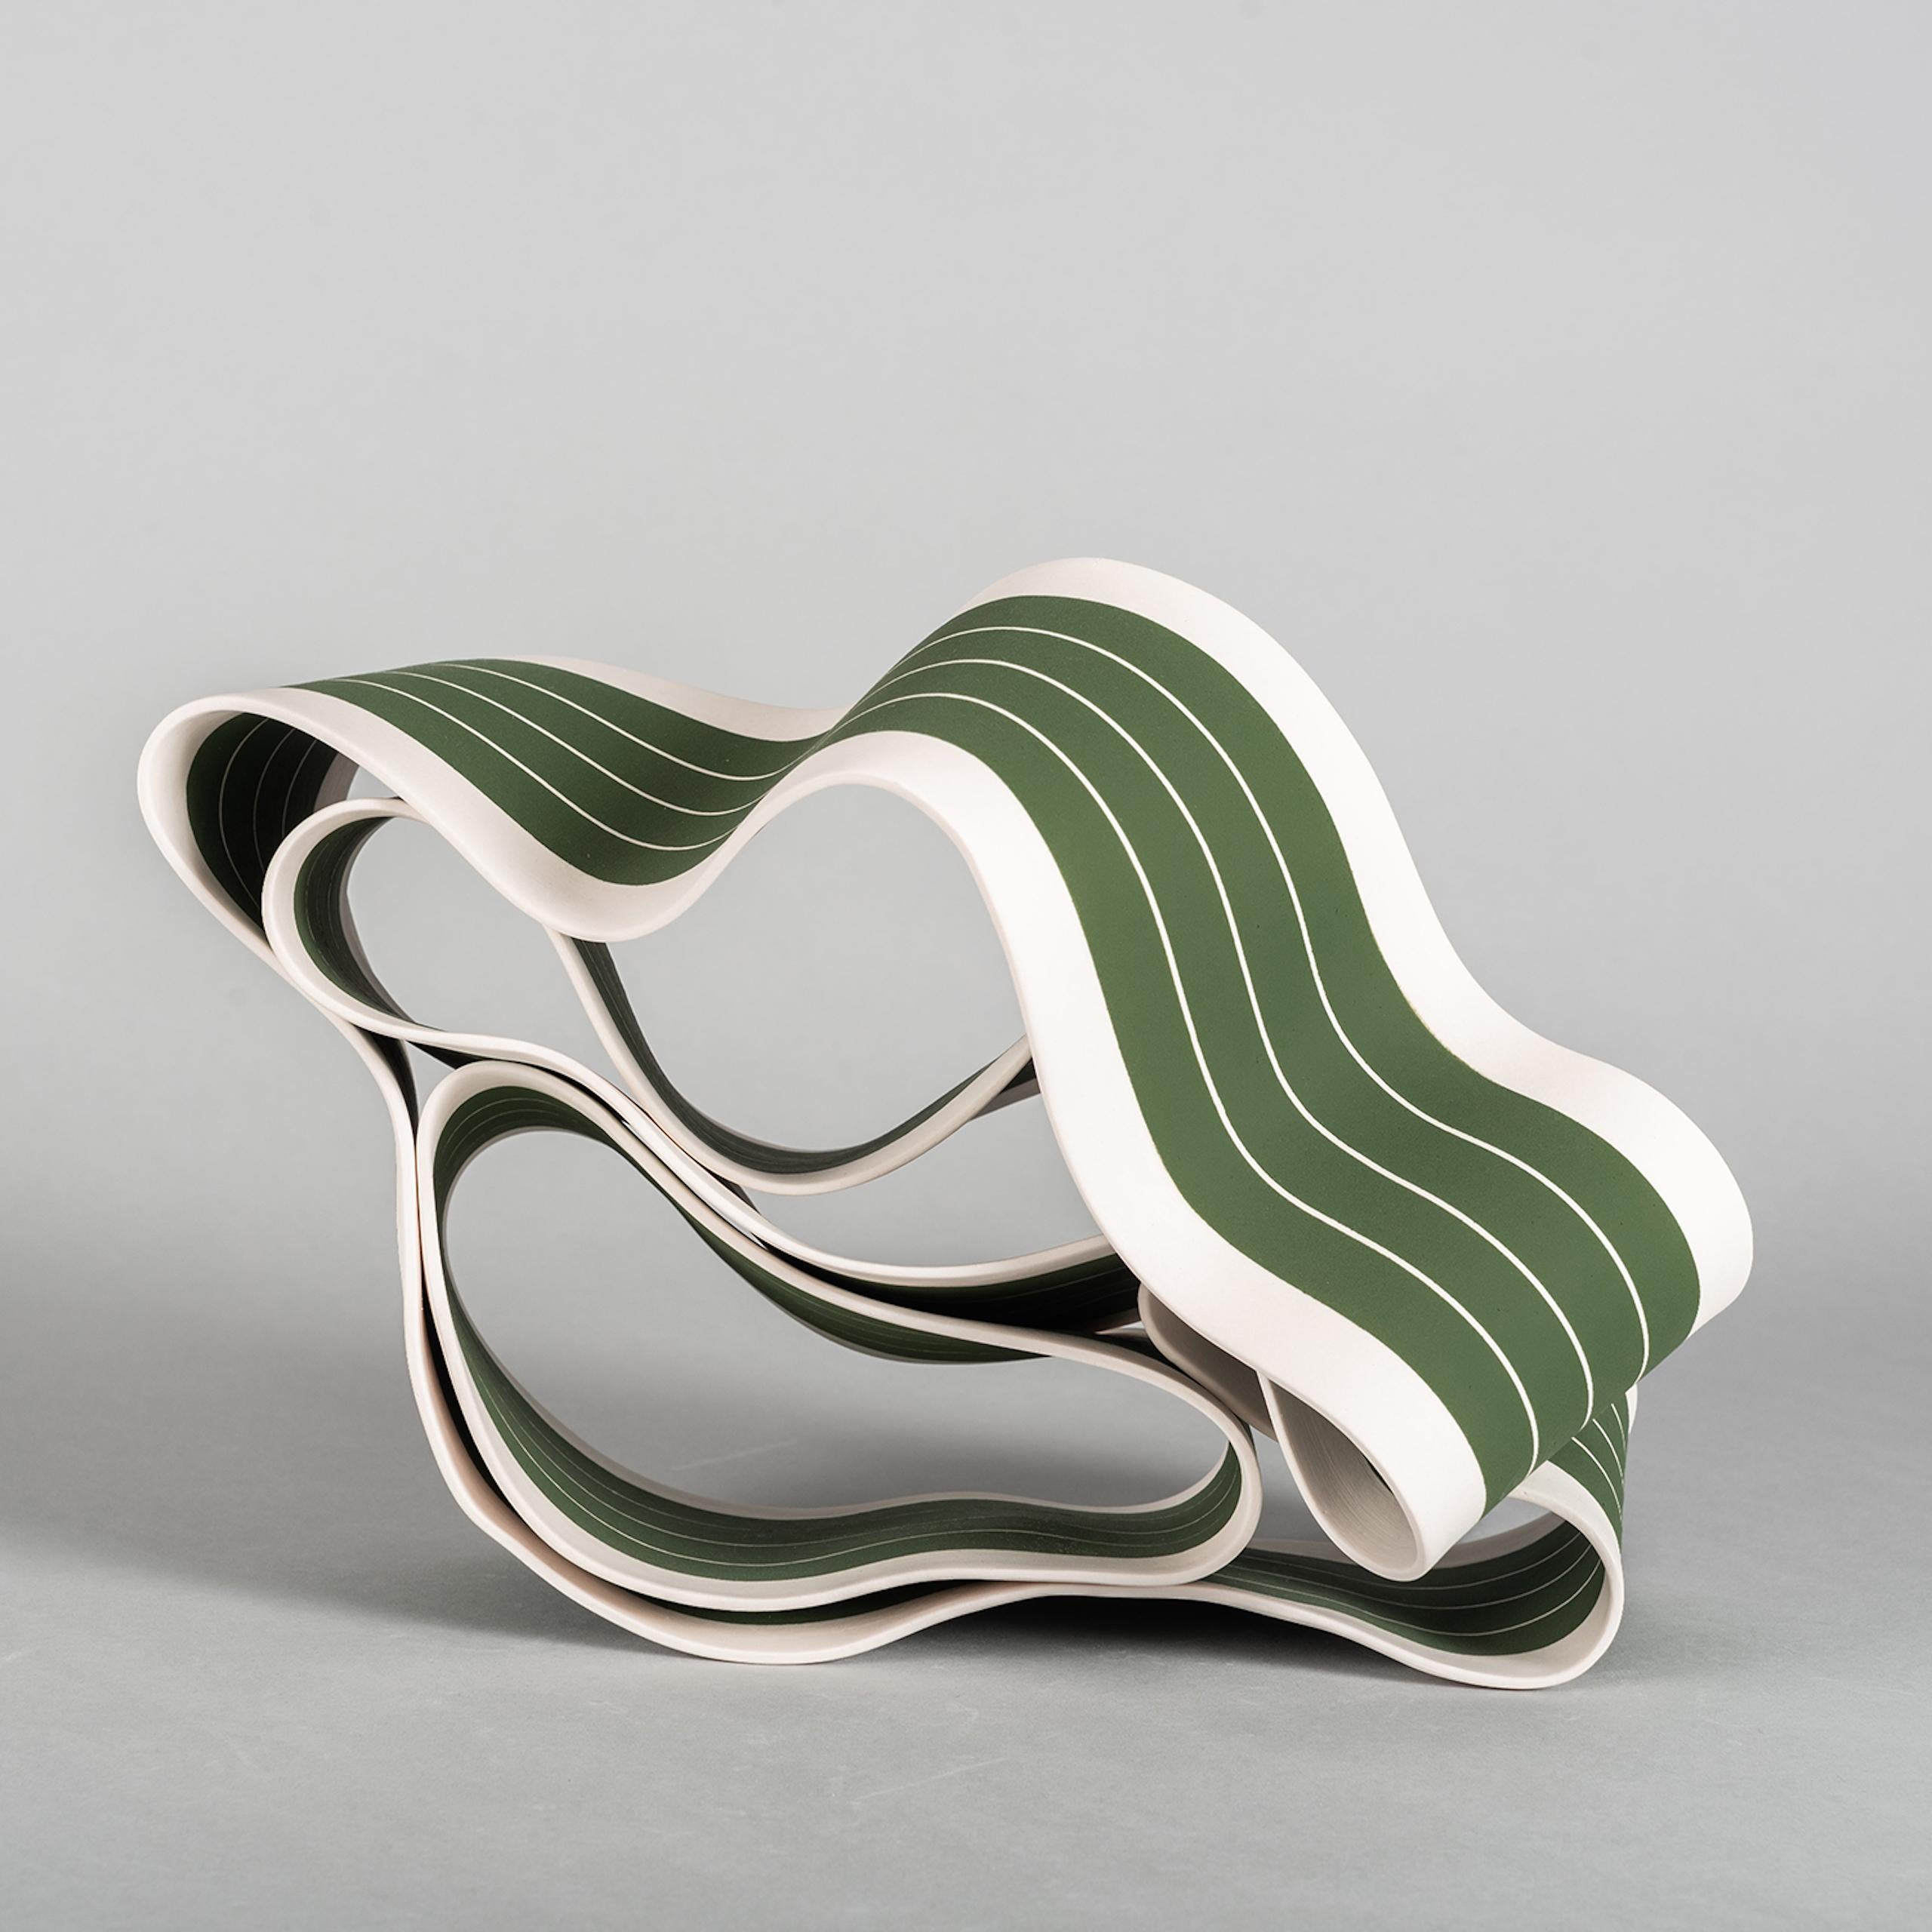 Folding in Motion 4 by Simcha Even-Chen - Porcelain sculpture, green lines For Sale 3